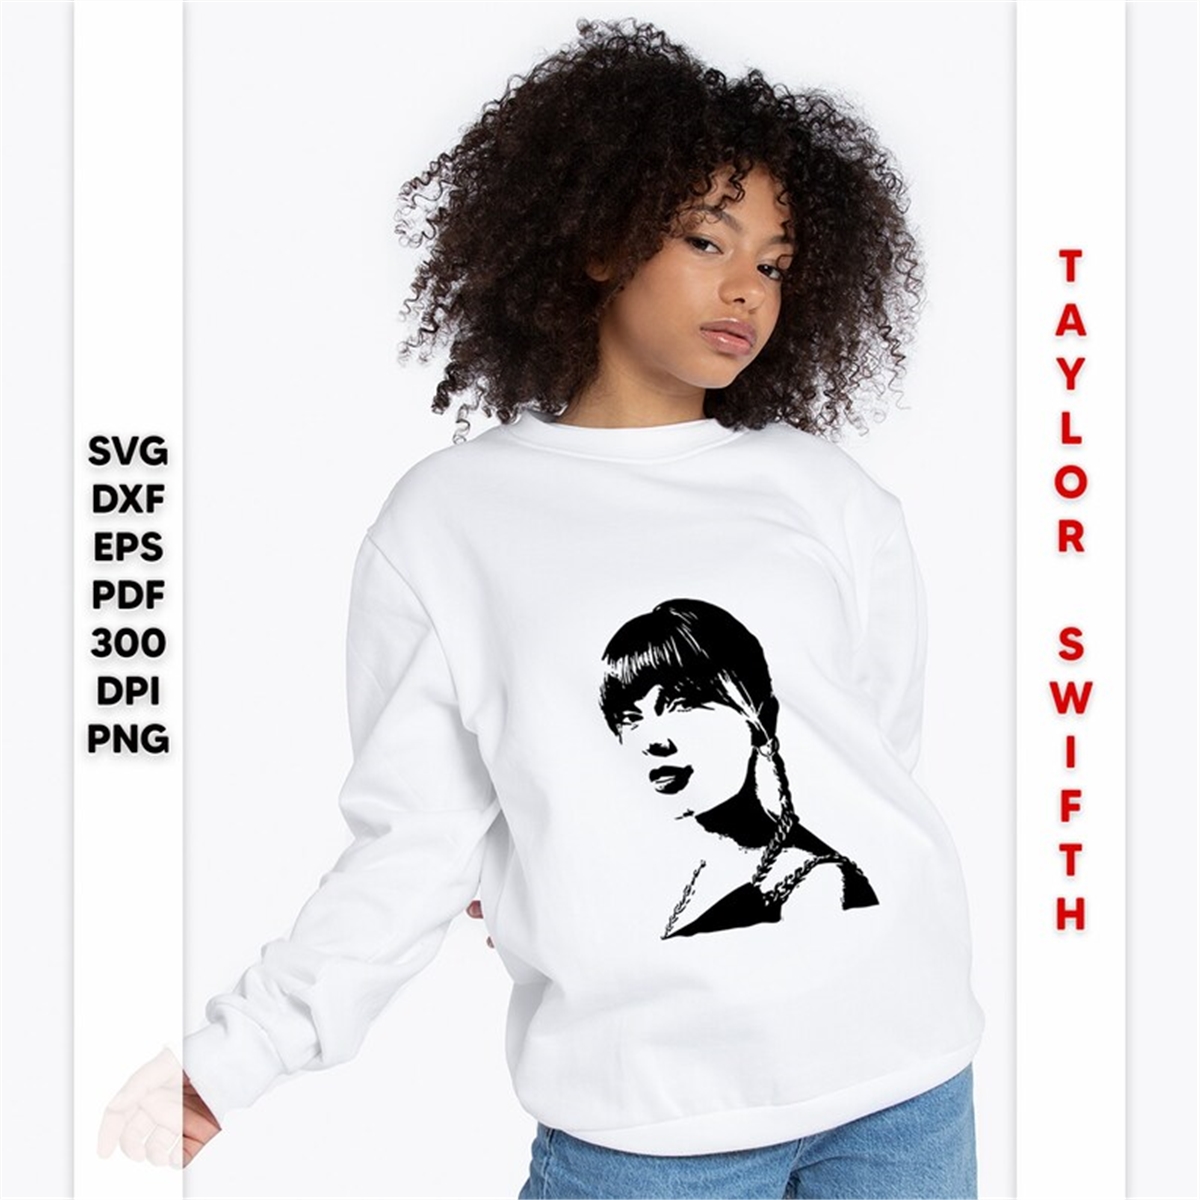 taylor-swift-svg-taylor-swift-png-swiftie-merch-gift-taylor-image-1